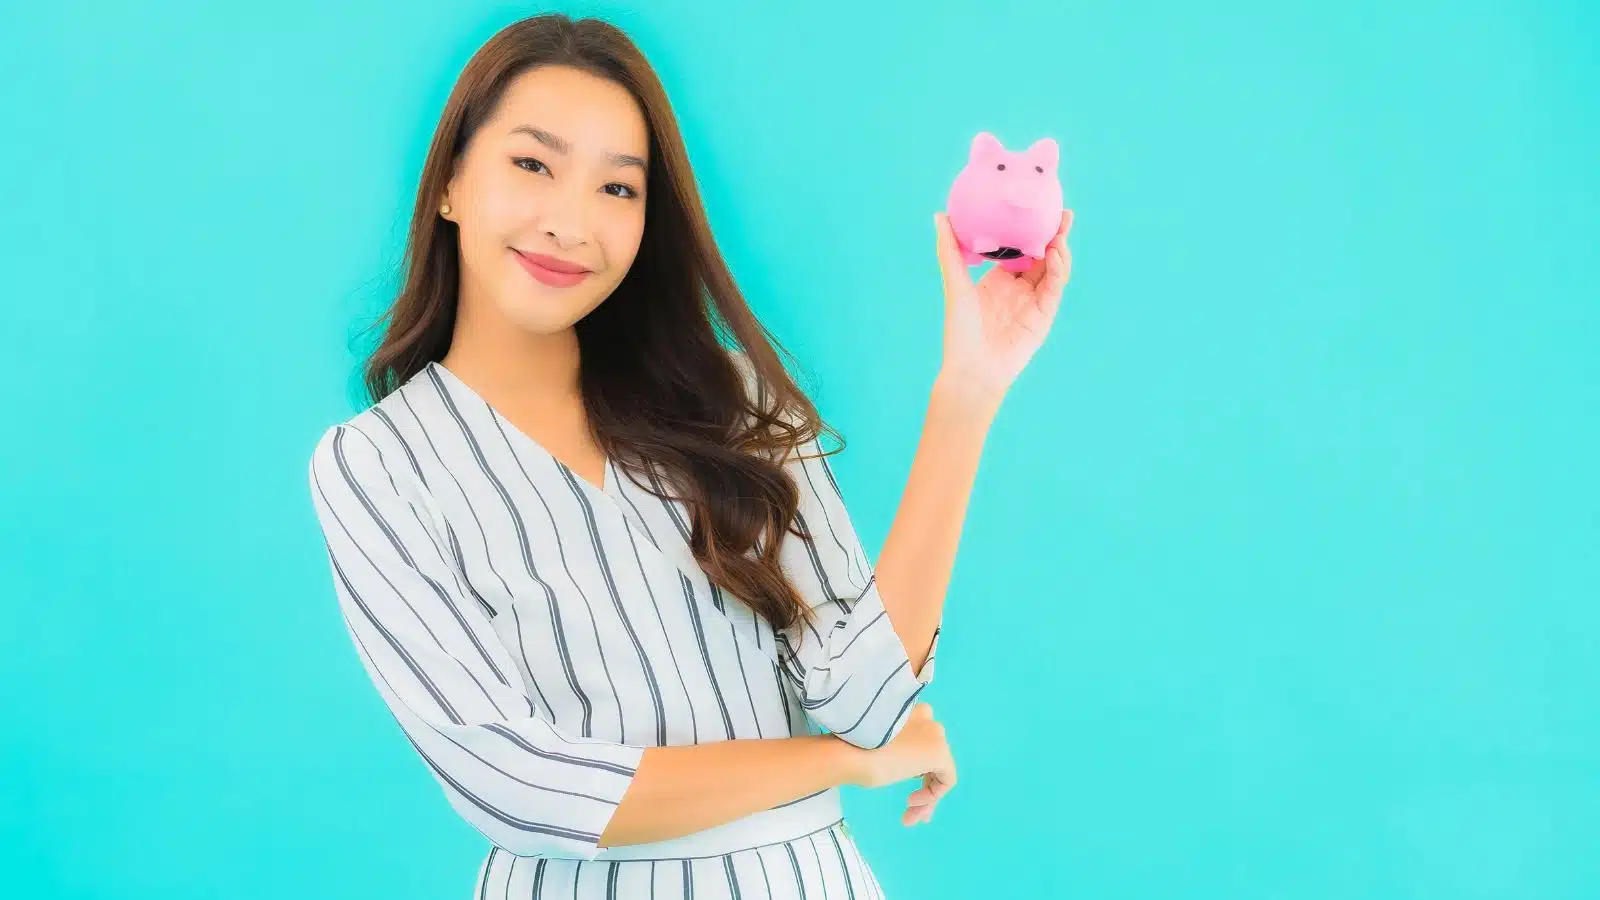 investing in your startup business - young woman smiling with a piggy bank